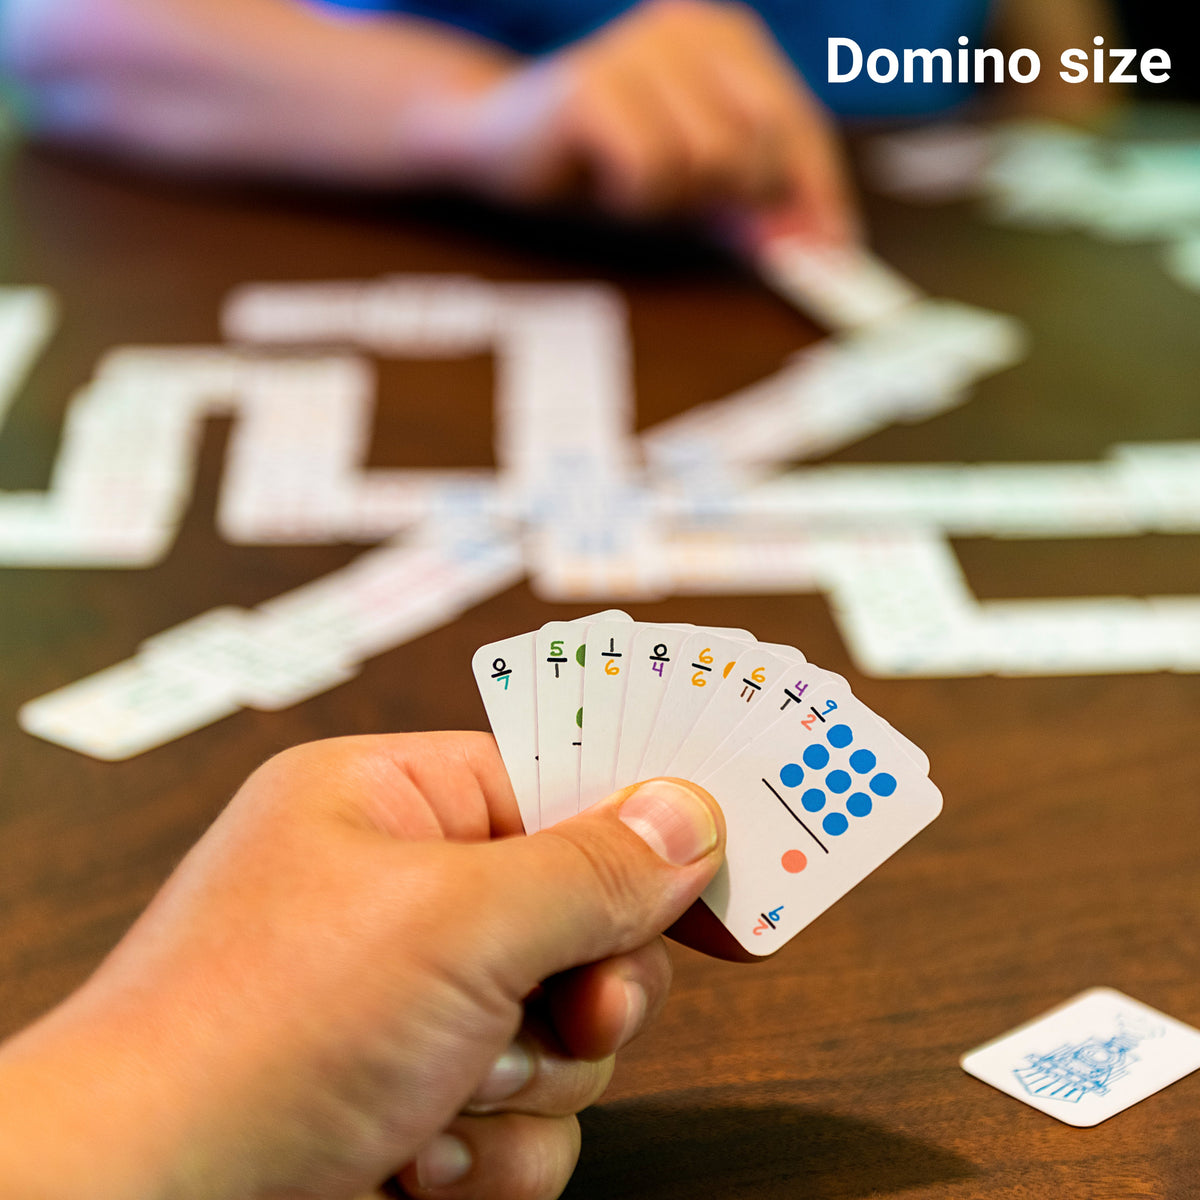 How To Play Dominoes - 12 steps